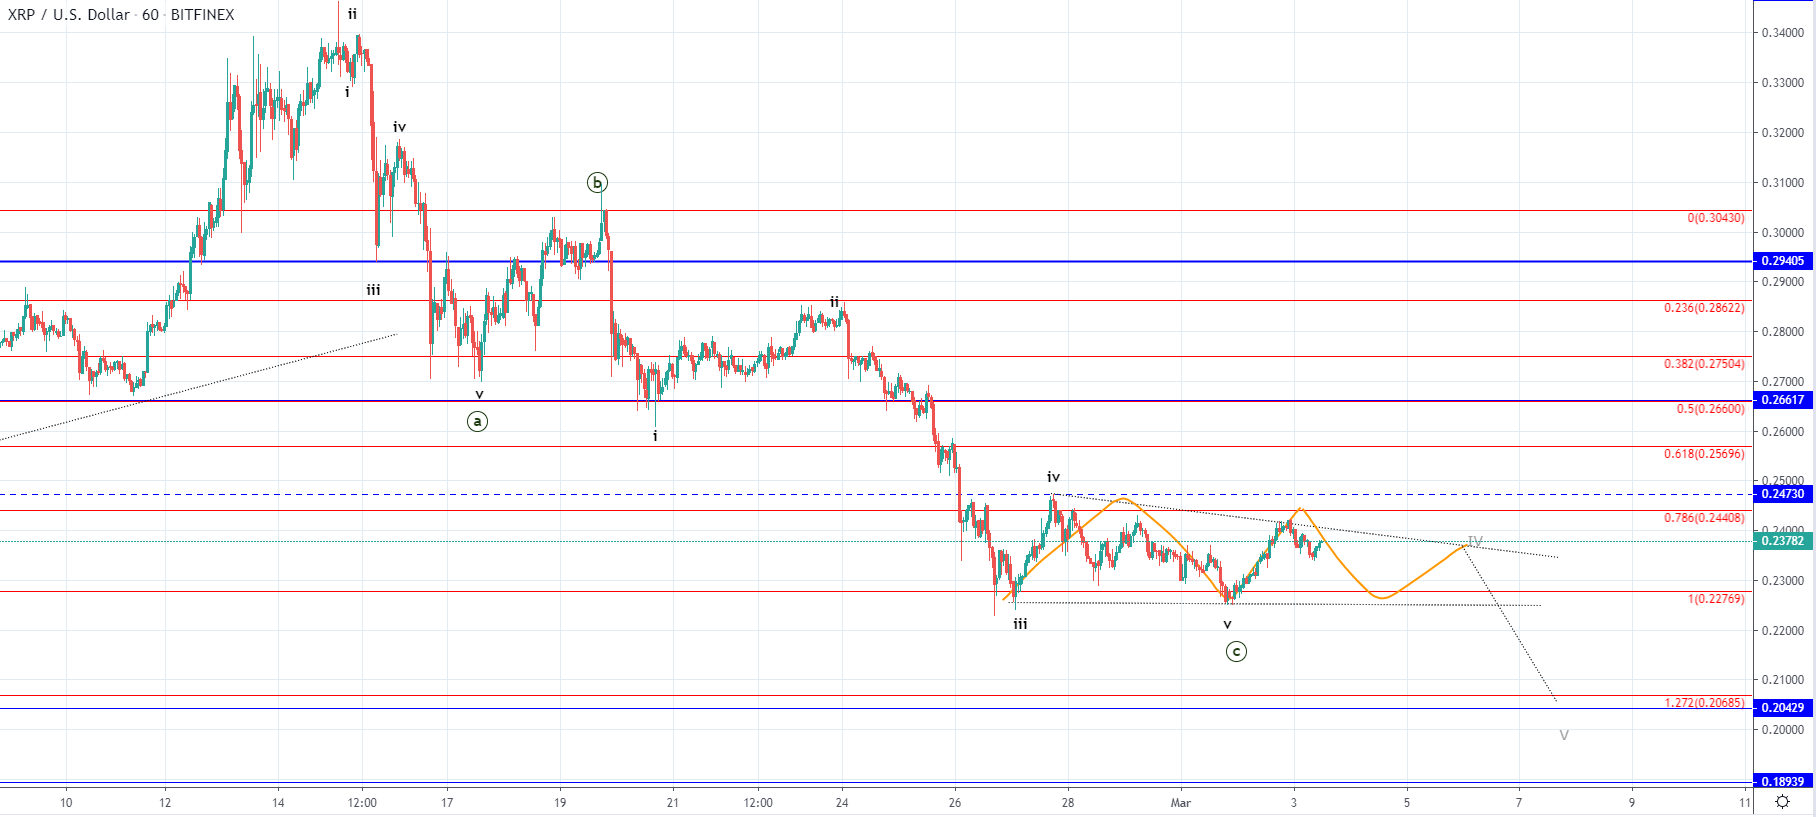 BTC and XRP - Has the correction ended? March 2020